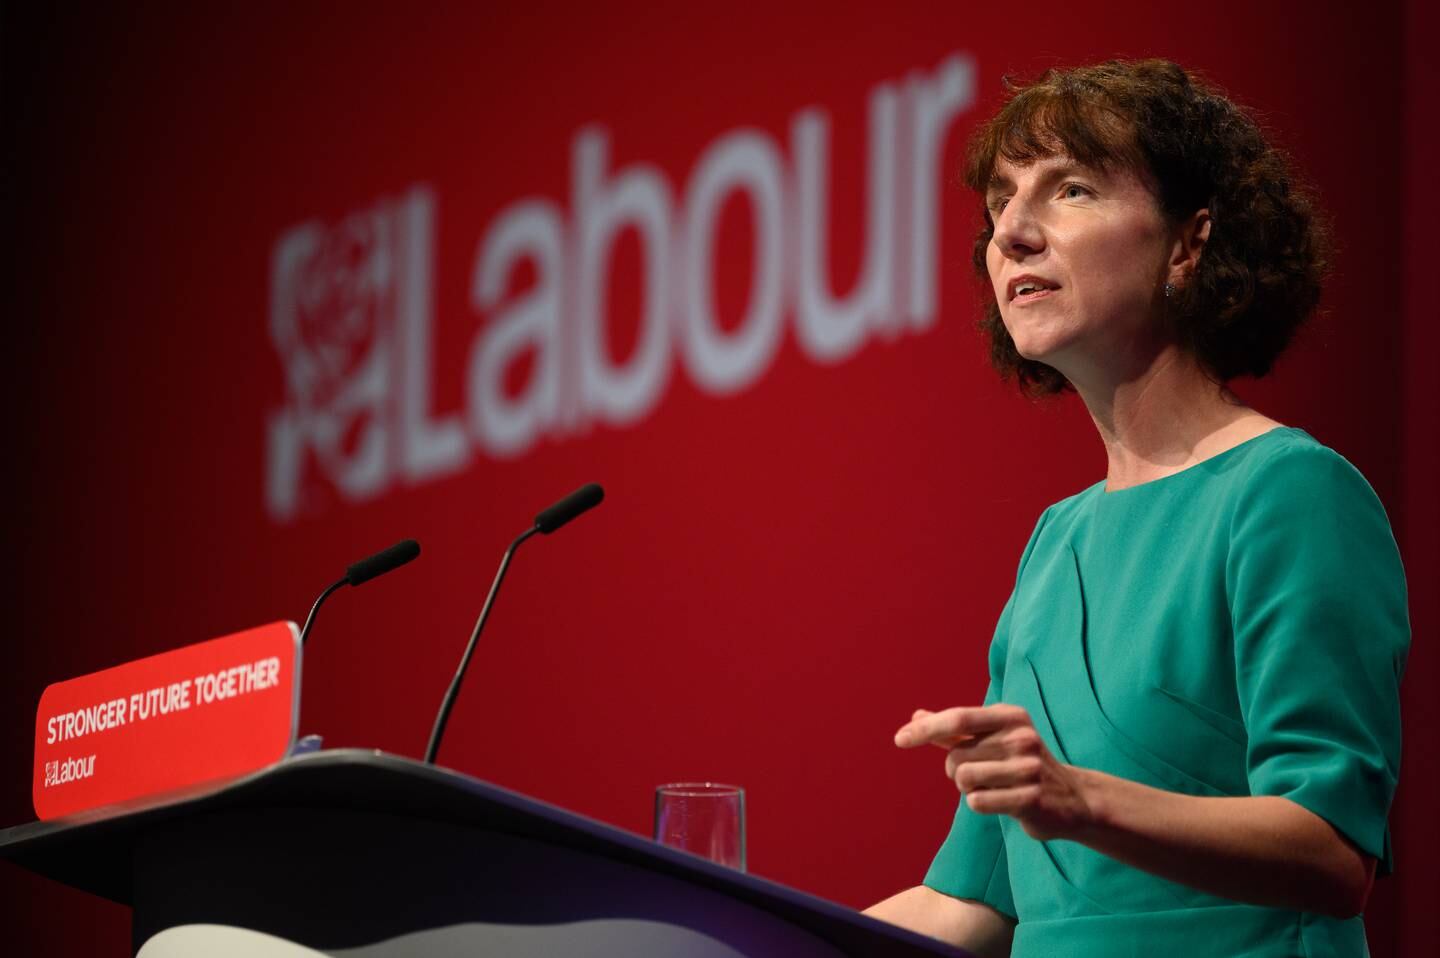 Labour chairwoman Anneliese Dodds said 'there are genuine questions to answer about whether a donation from Sir Ehud to the Conservative Party complied with UK law'. Getty Images